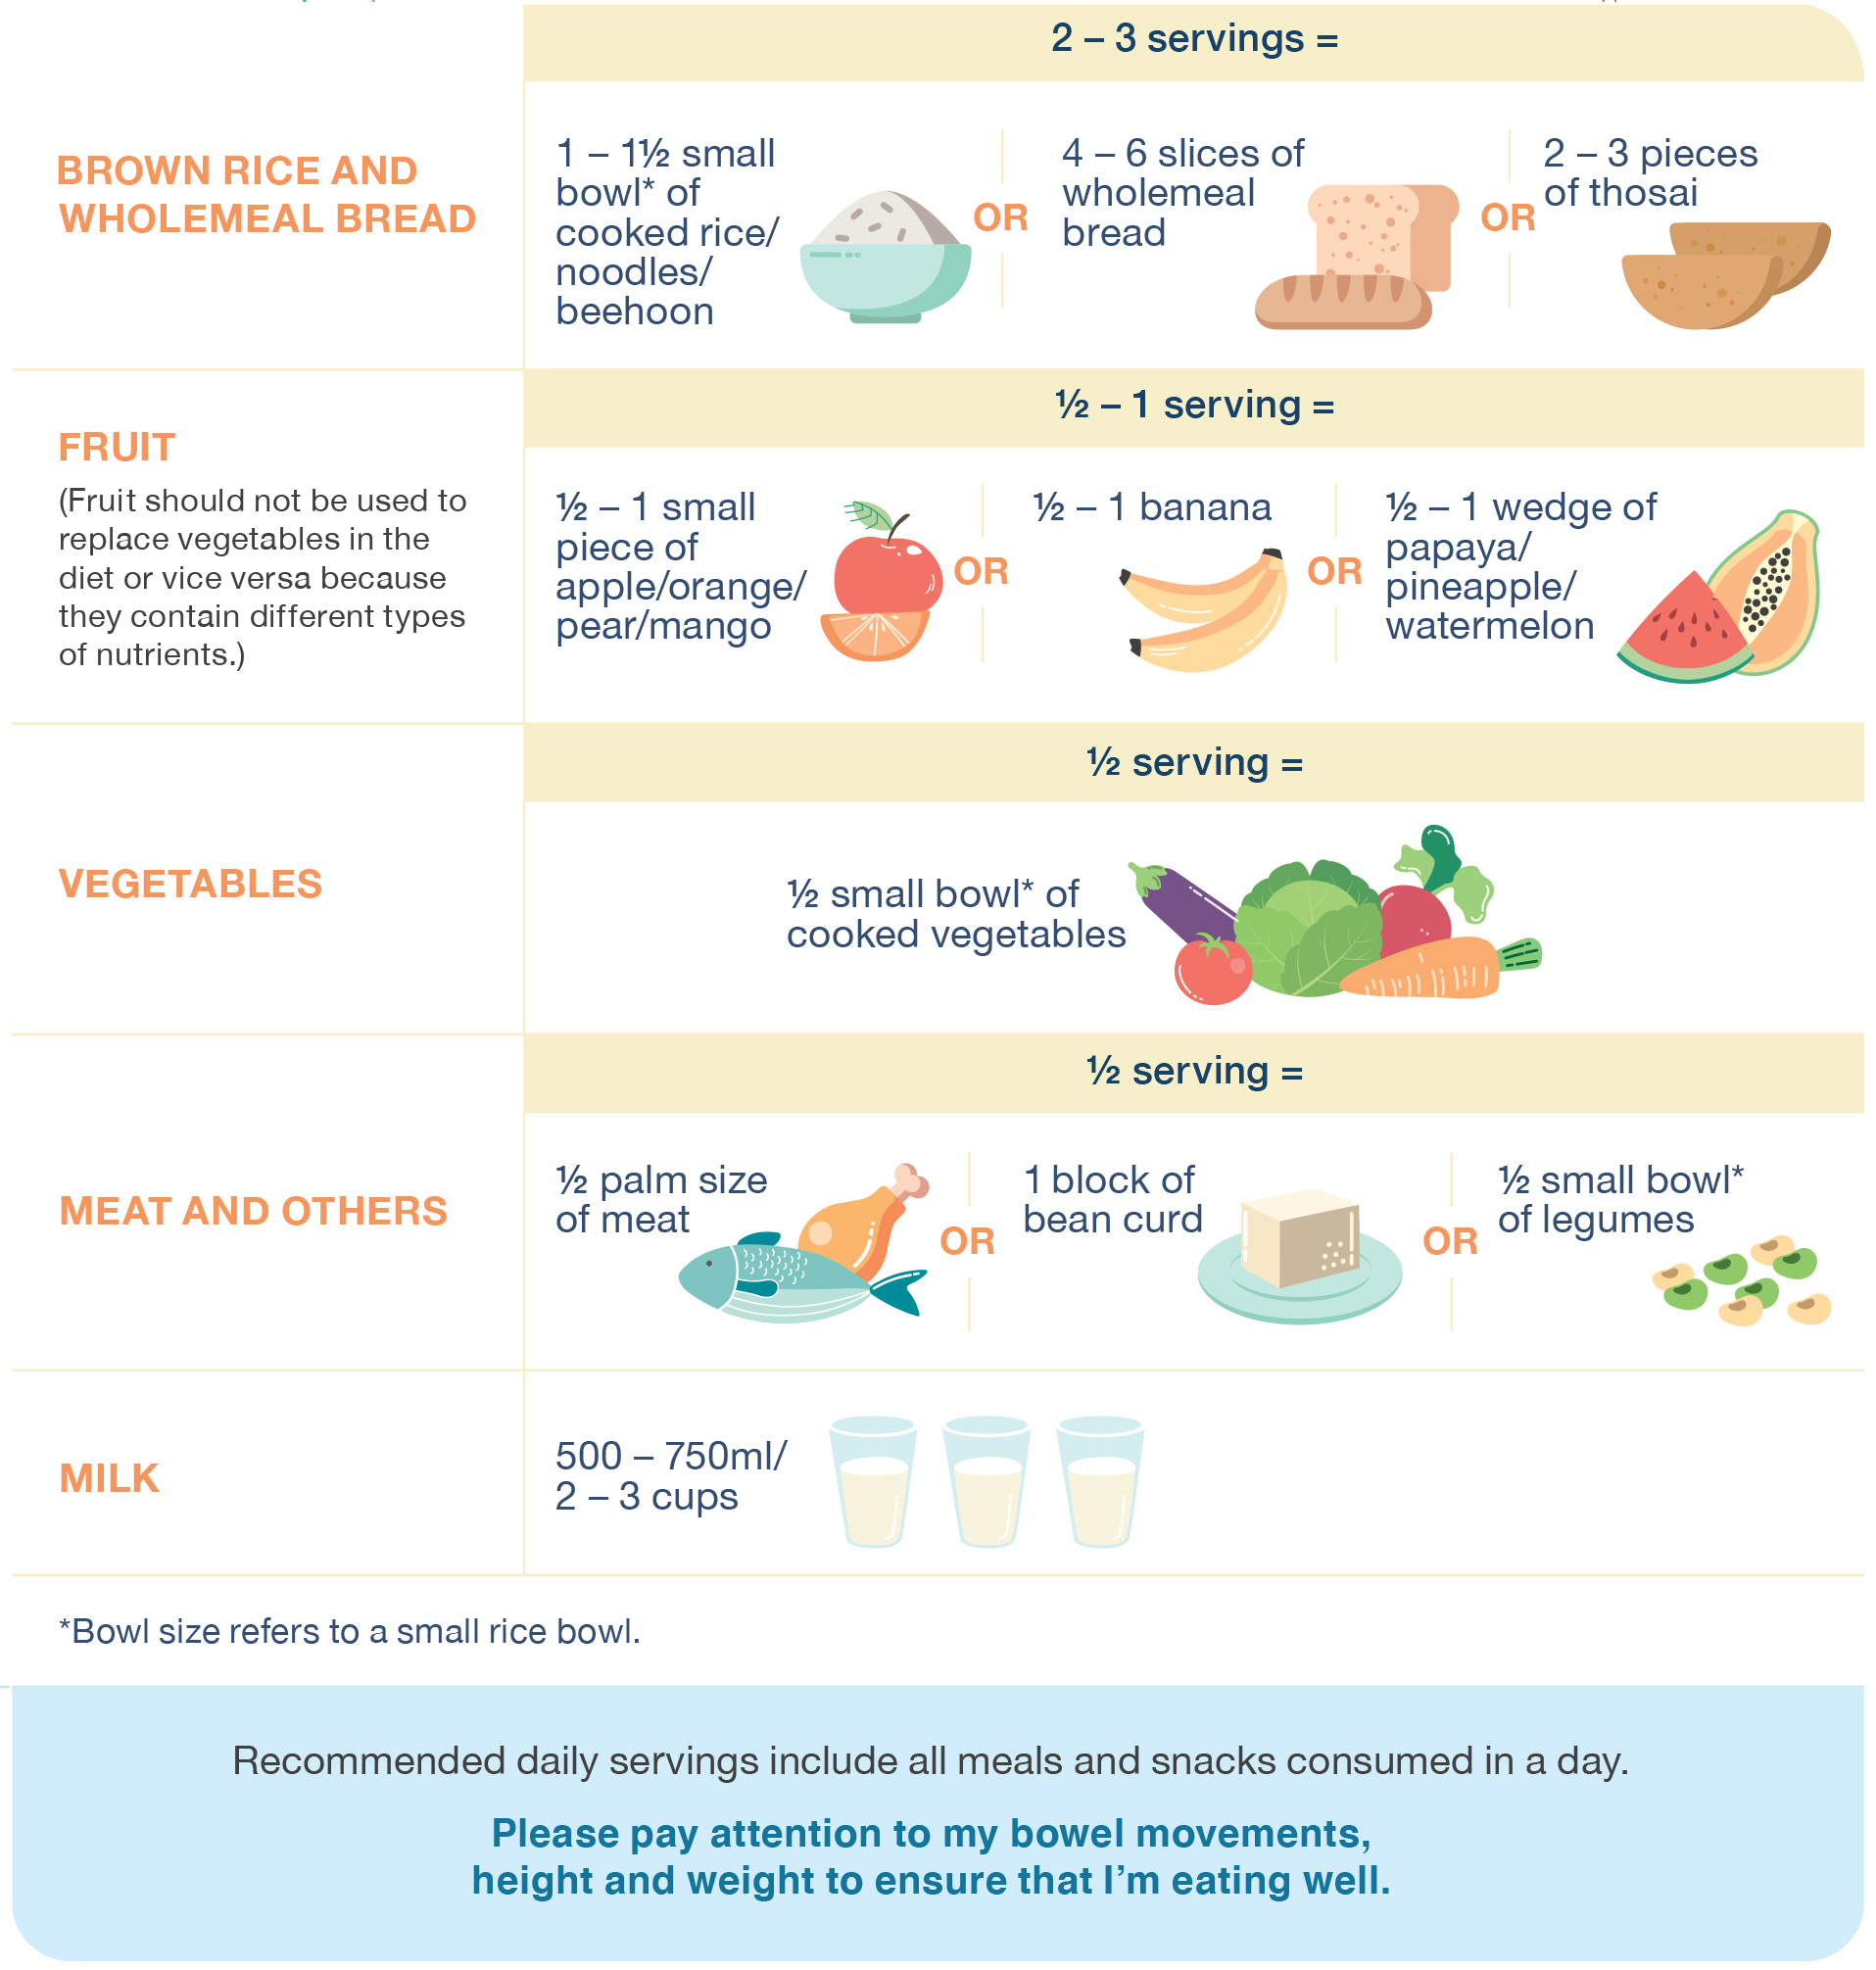 recommended portion sizes and servings per day